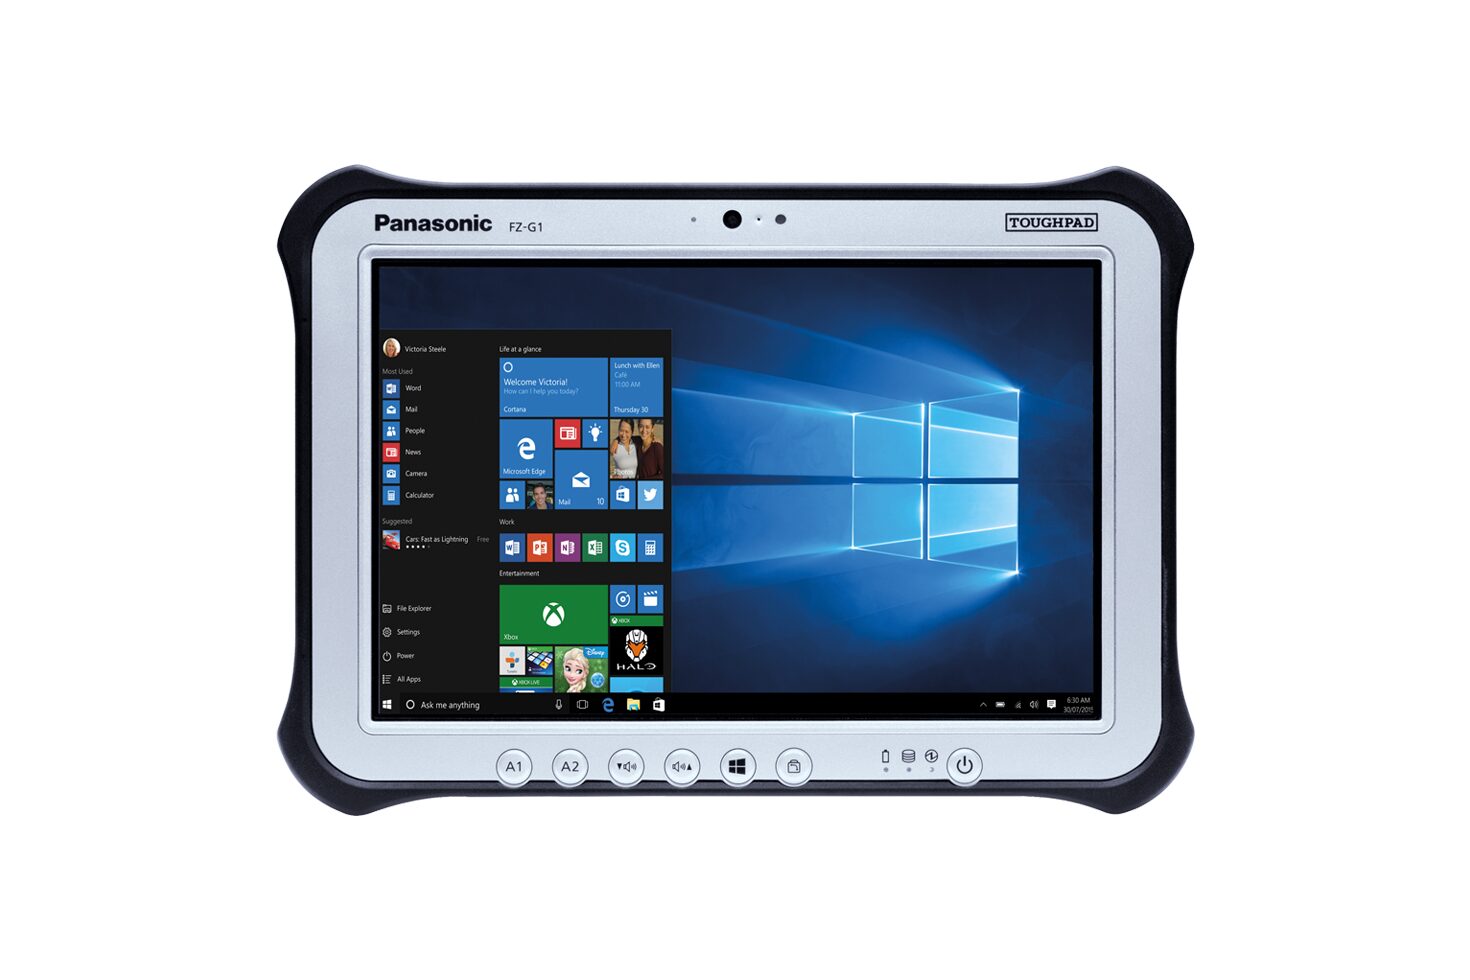 TOUGHBOOK G1 image gallery